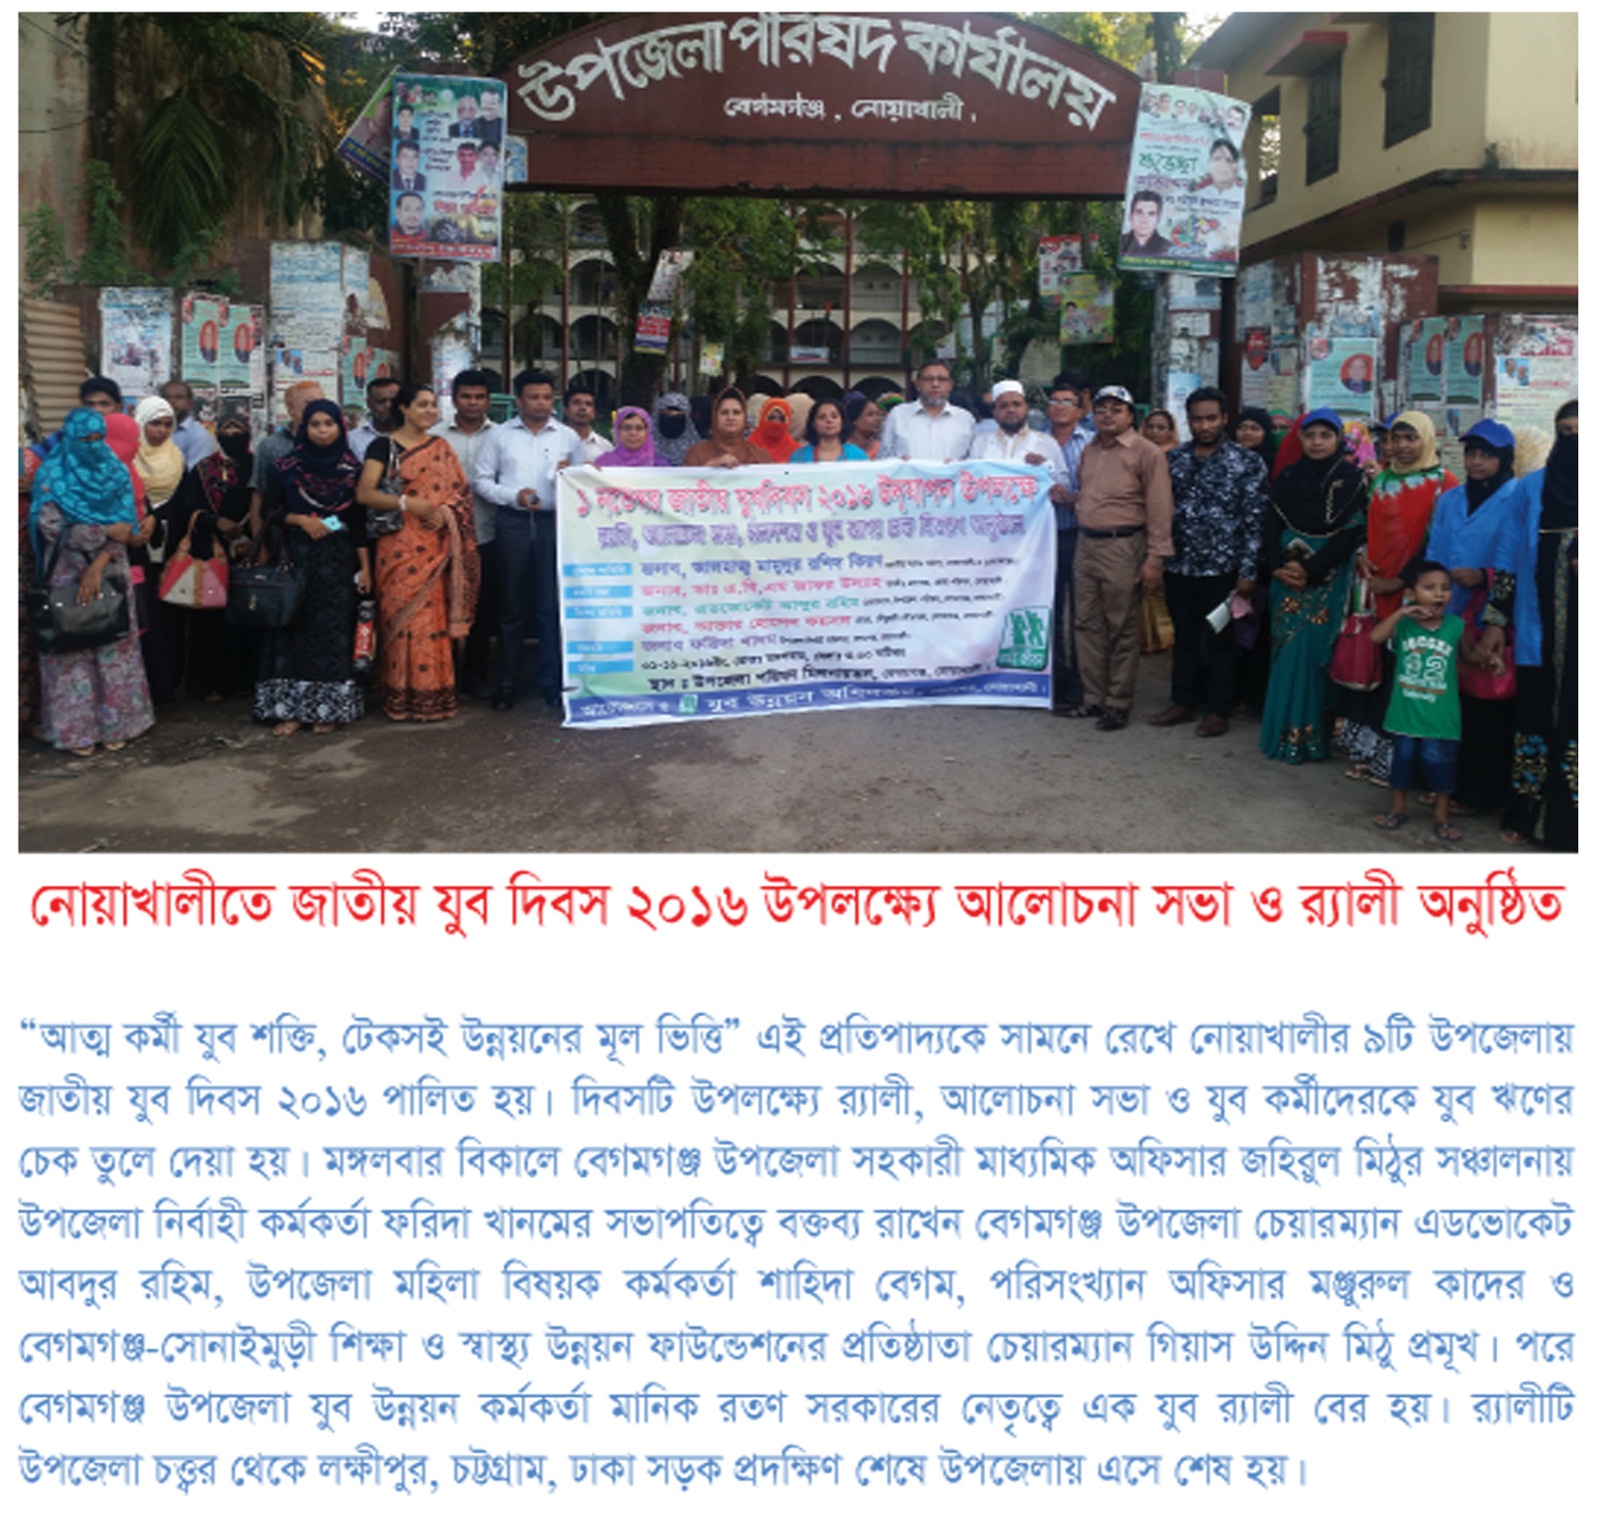 In the Pictrue- Chairman of Begamganj-Sonaimuri Shikkha O Sastha Unnayan Foundation and Begumganj Technical and Computer Institute Principal Gias Uddin Mithu participated in discussions and rallies on the occasion of National Youth Day’ 2016. Upazilla Chairman Ad. Abdur Rahim, Upazilla Nirbahi Officer Farida Khanam, Juba Unnayan Officer, Upazilla Vice Chairman, Woman Vice Chairman including other leaders were present.